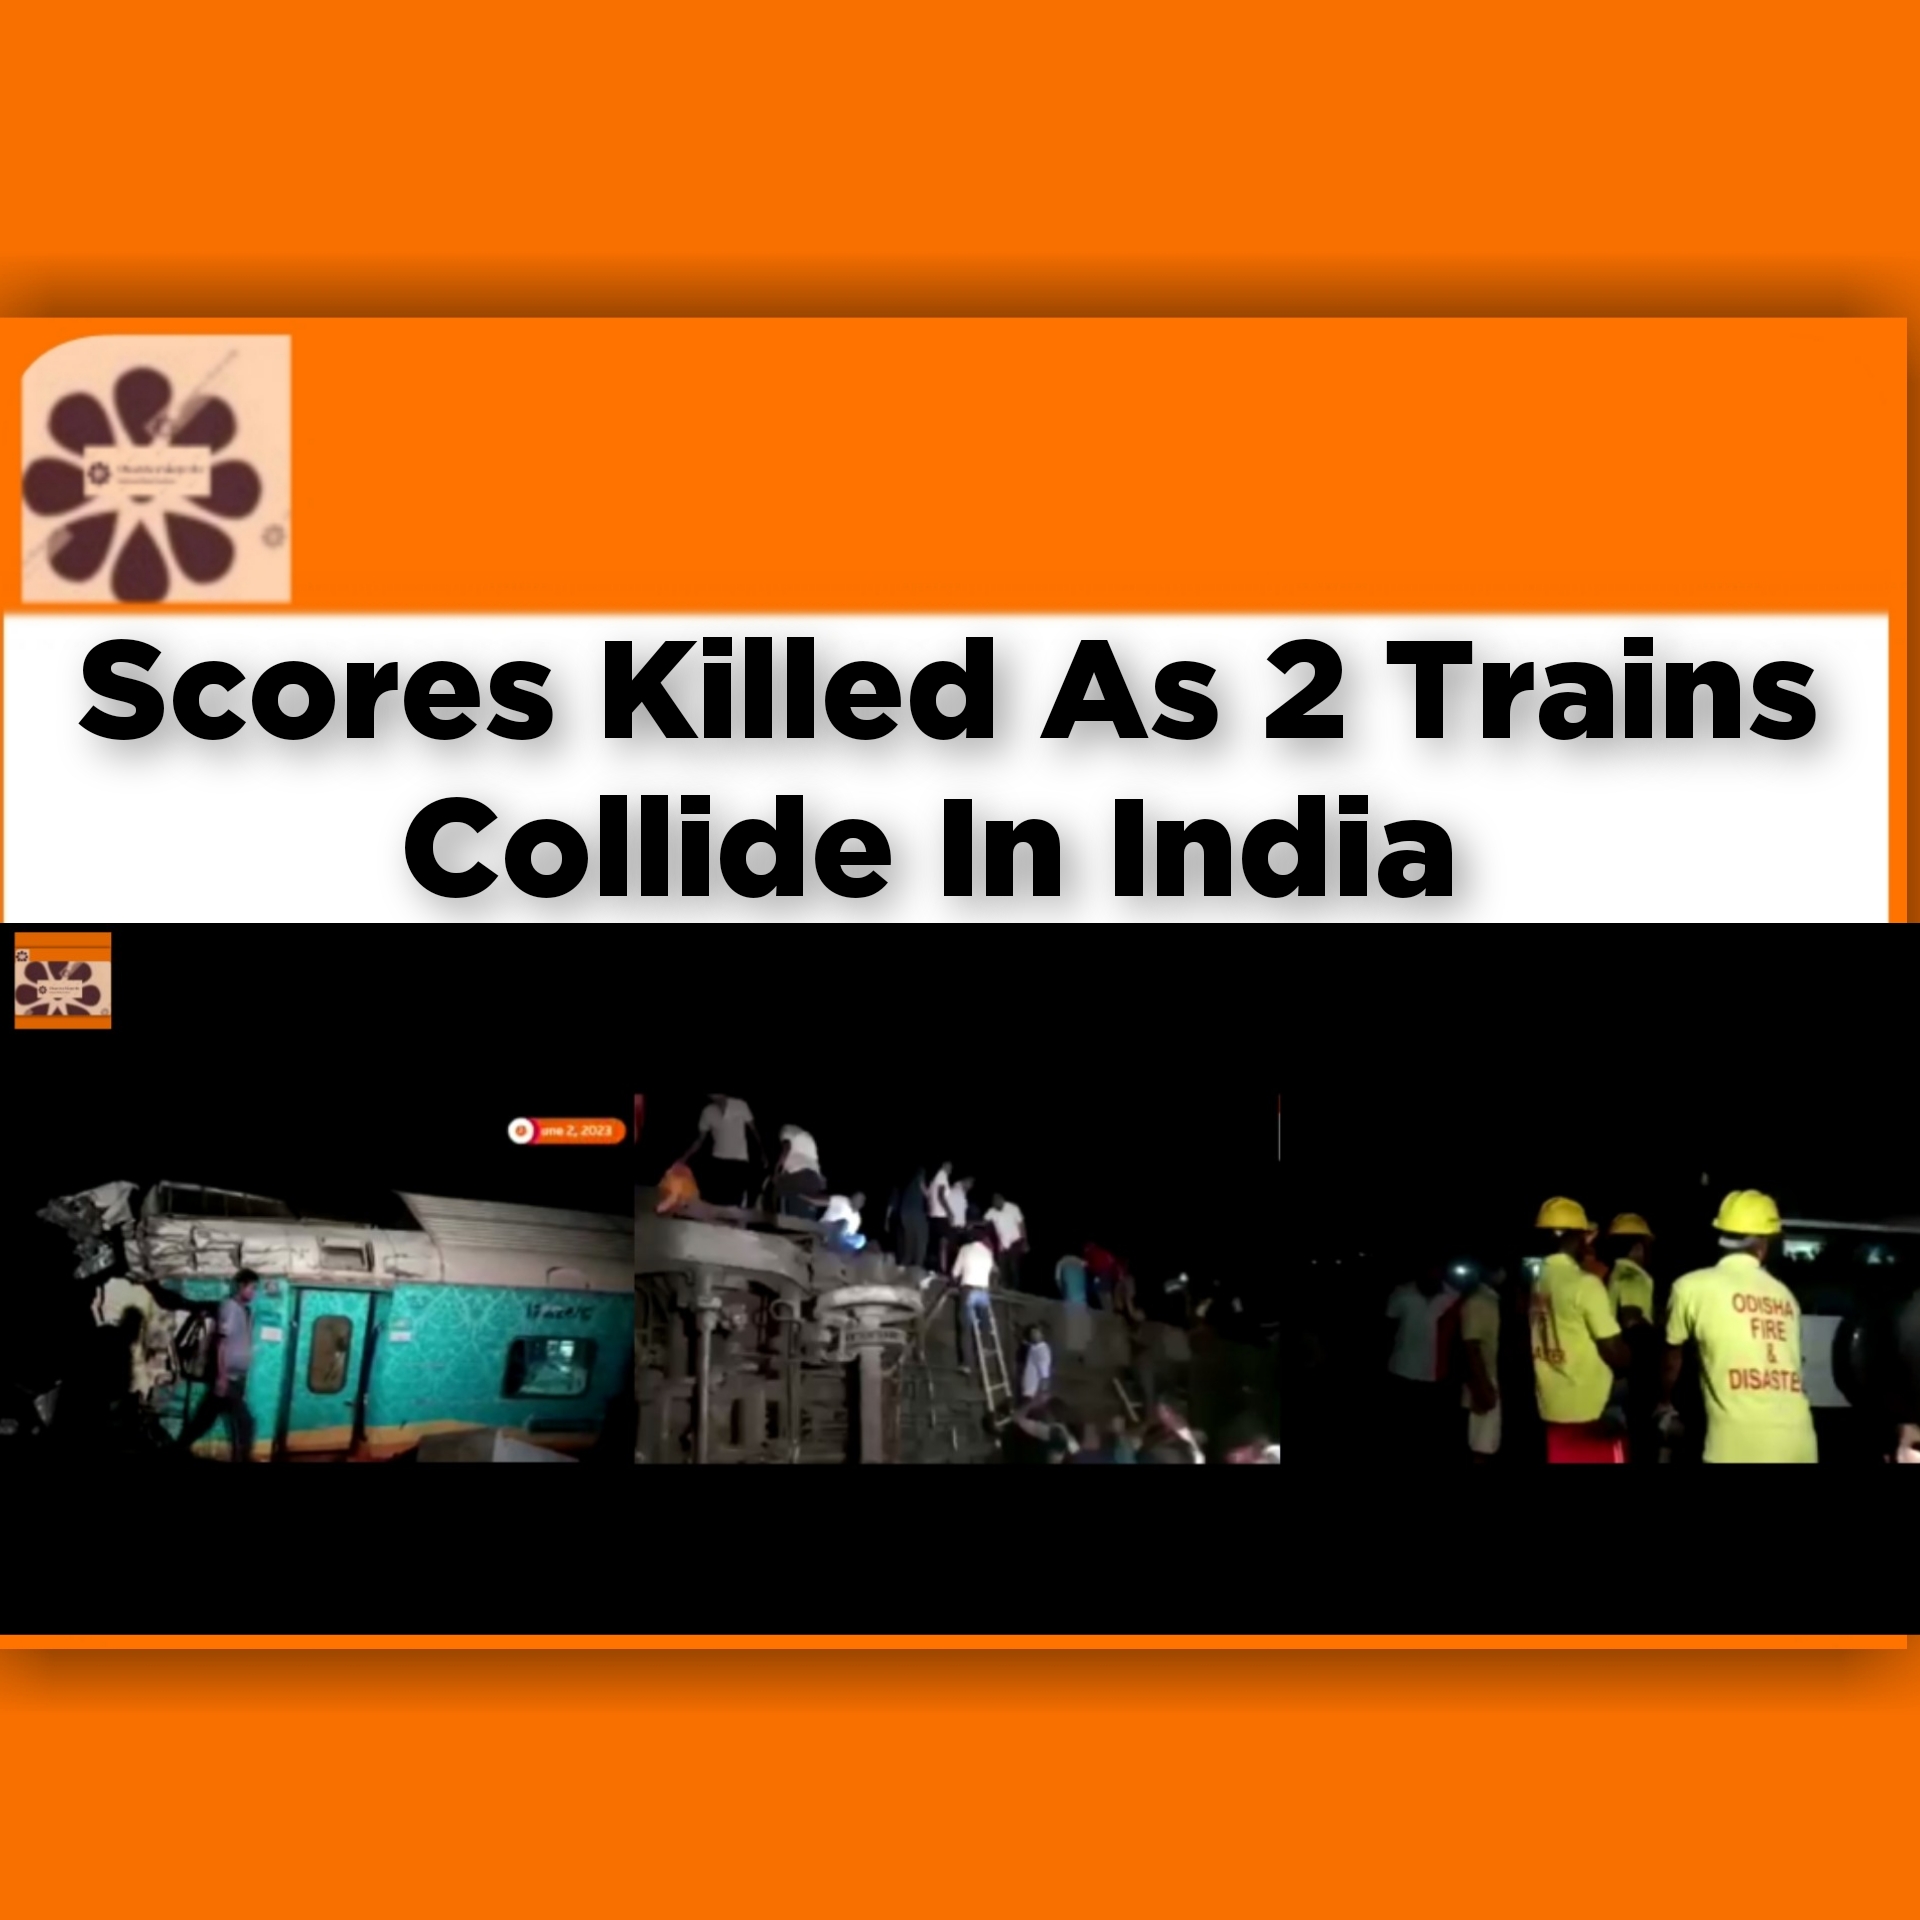 Scores Killed As 2 Trains Collide In India